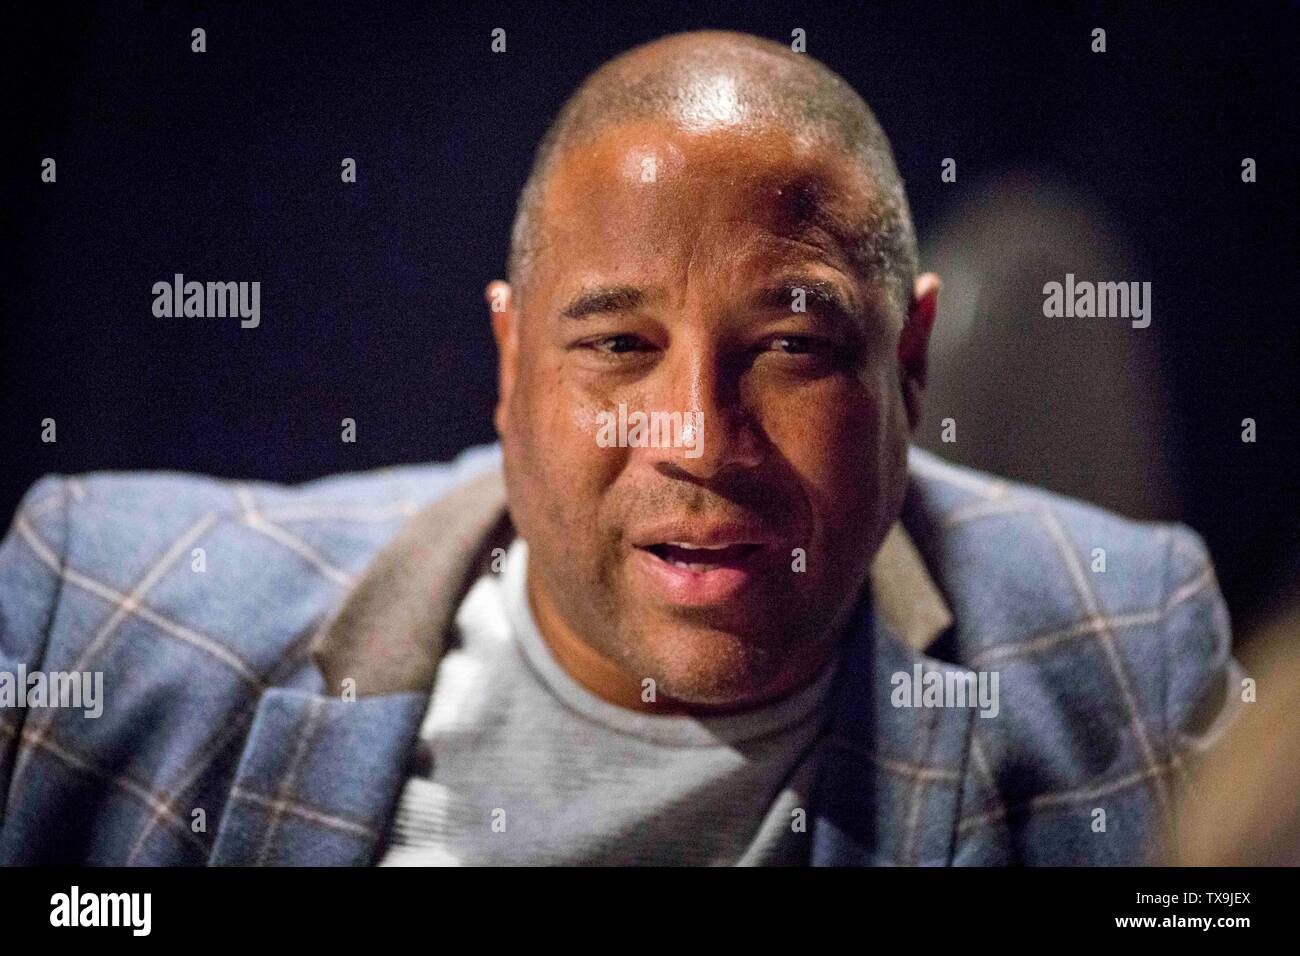 John Barnes at a Remain (anti Brexit) rally in Leeds Stock Photo